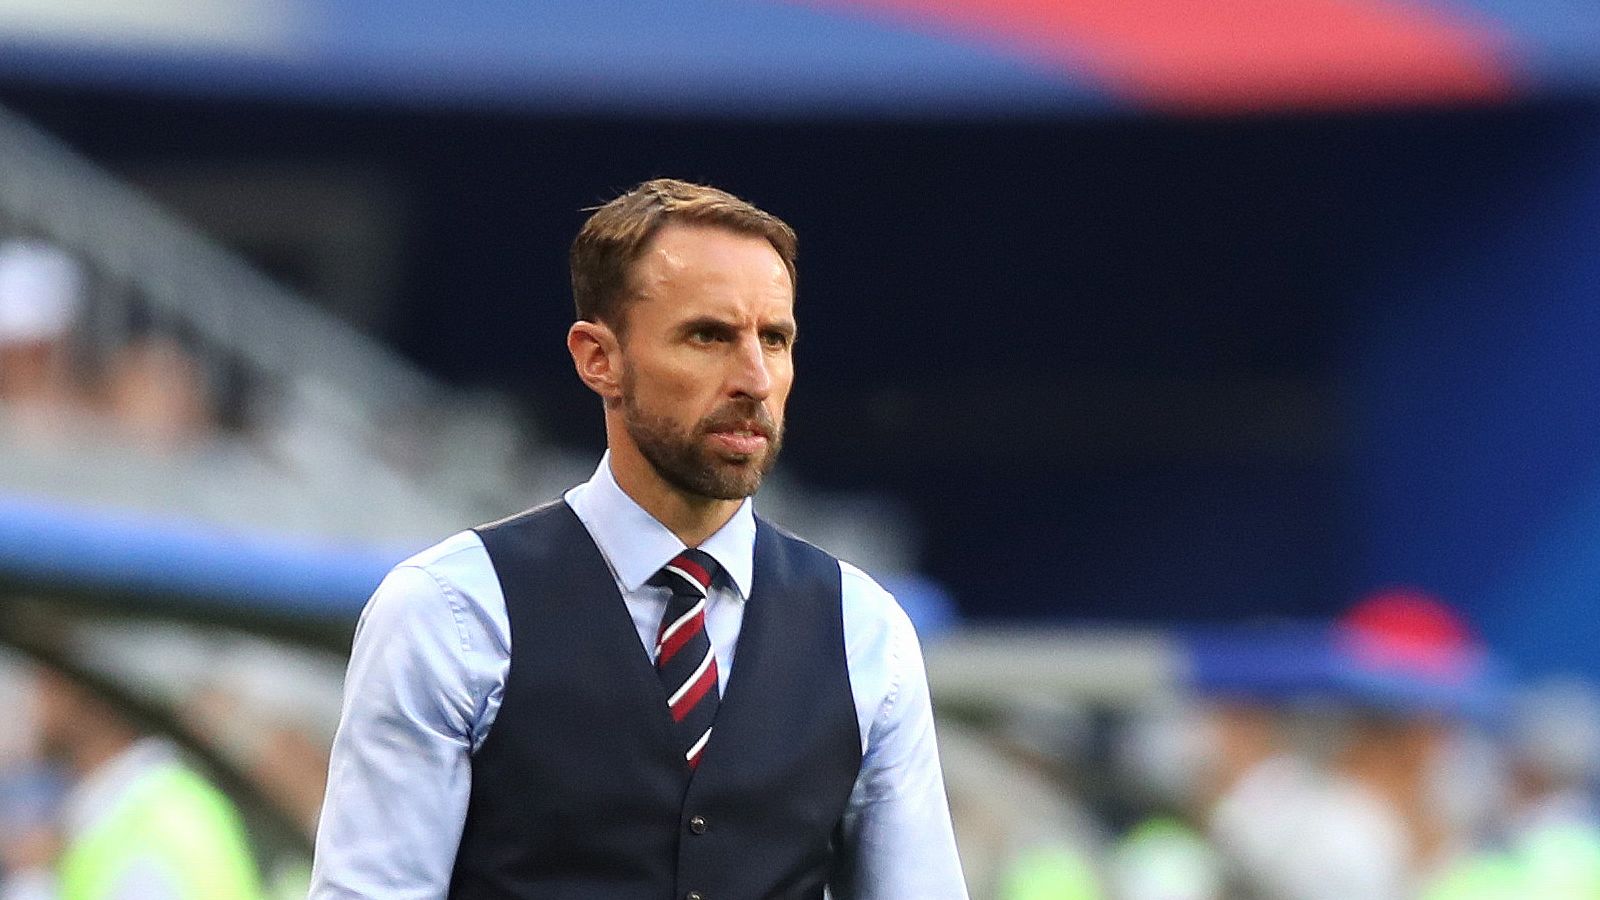  Gareth Southgate, the current manager of the England national team, is under pressure after a poor run of results.